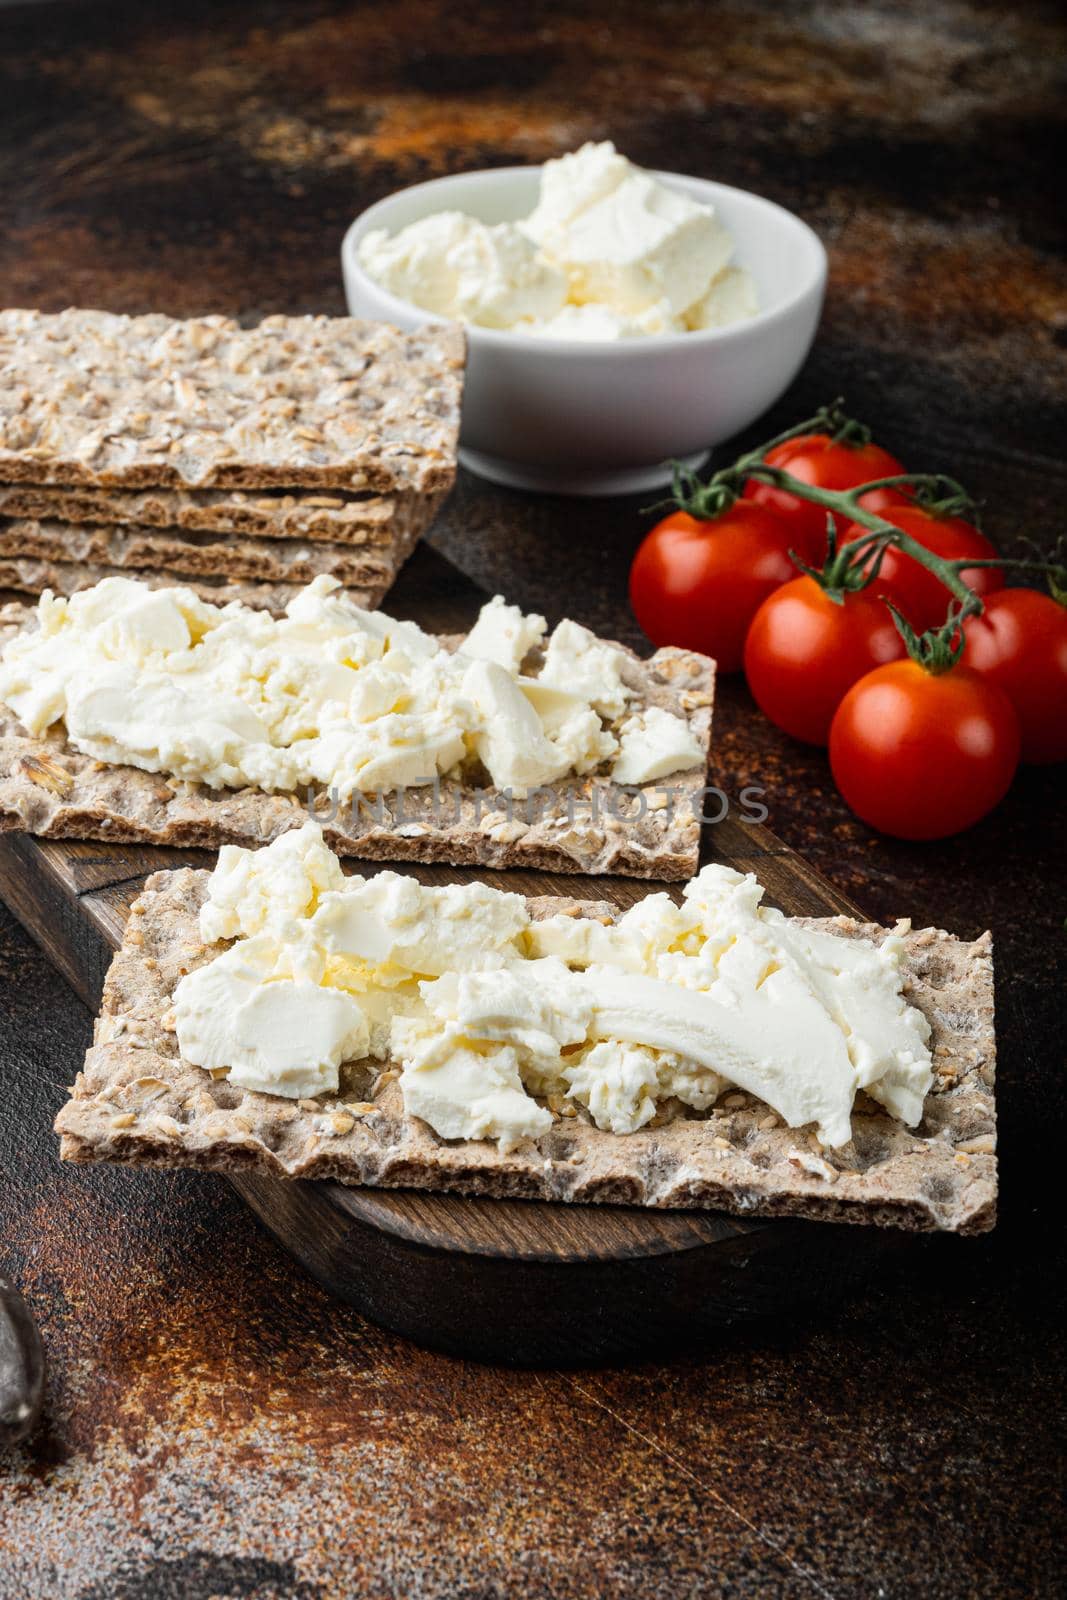 Crisp bread with cream cheese set, on old dark rustic table background